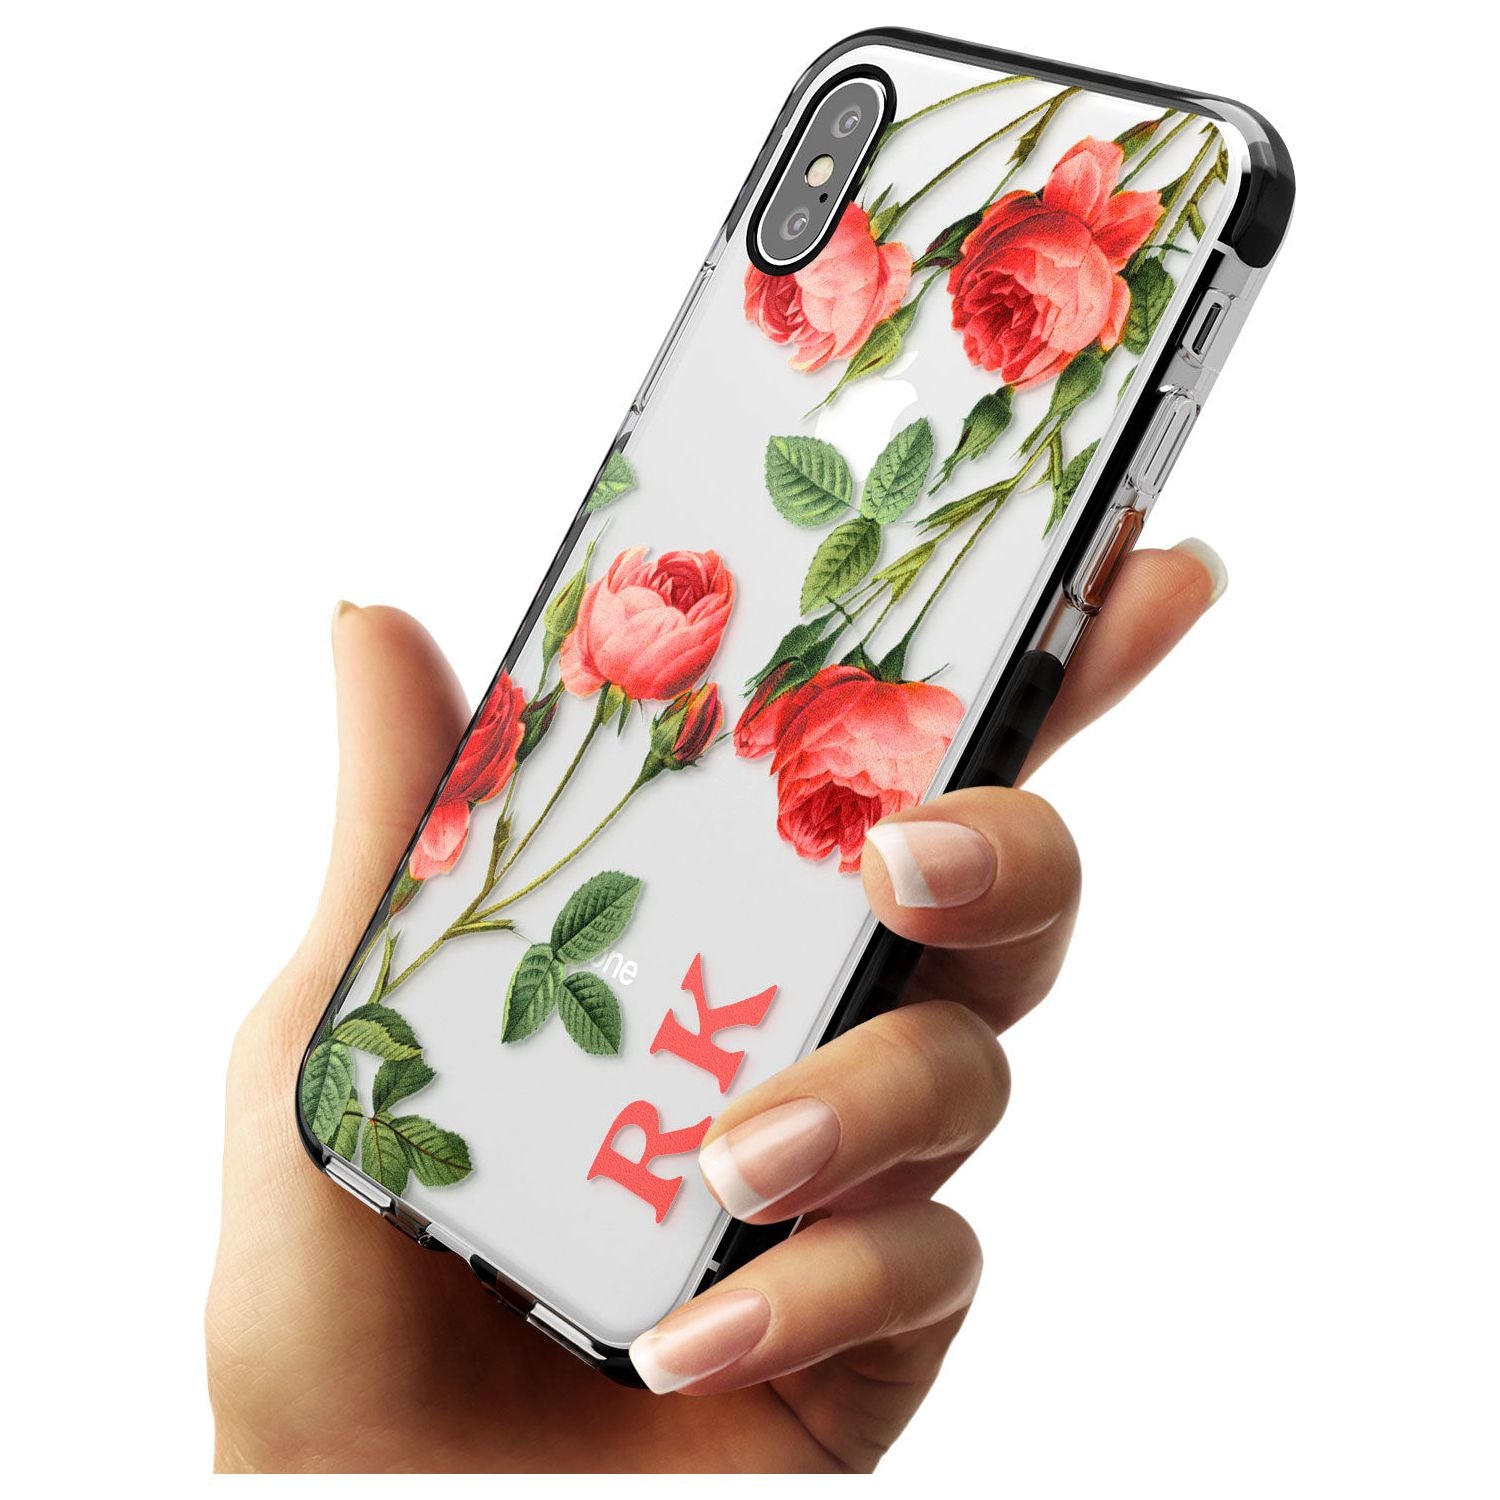 Custom Clear Vintage Floral Pink Roses Black Impact Phone Case for iPhone X XS Max XR